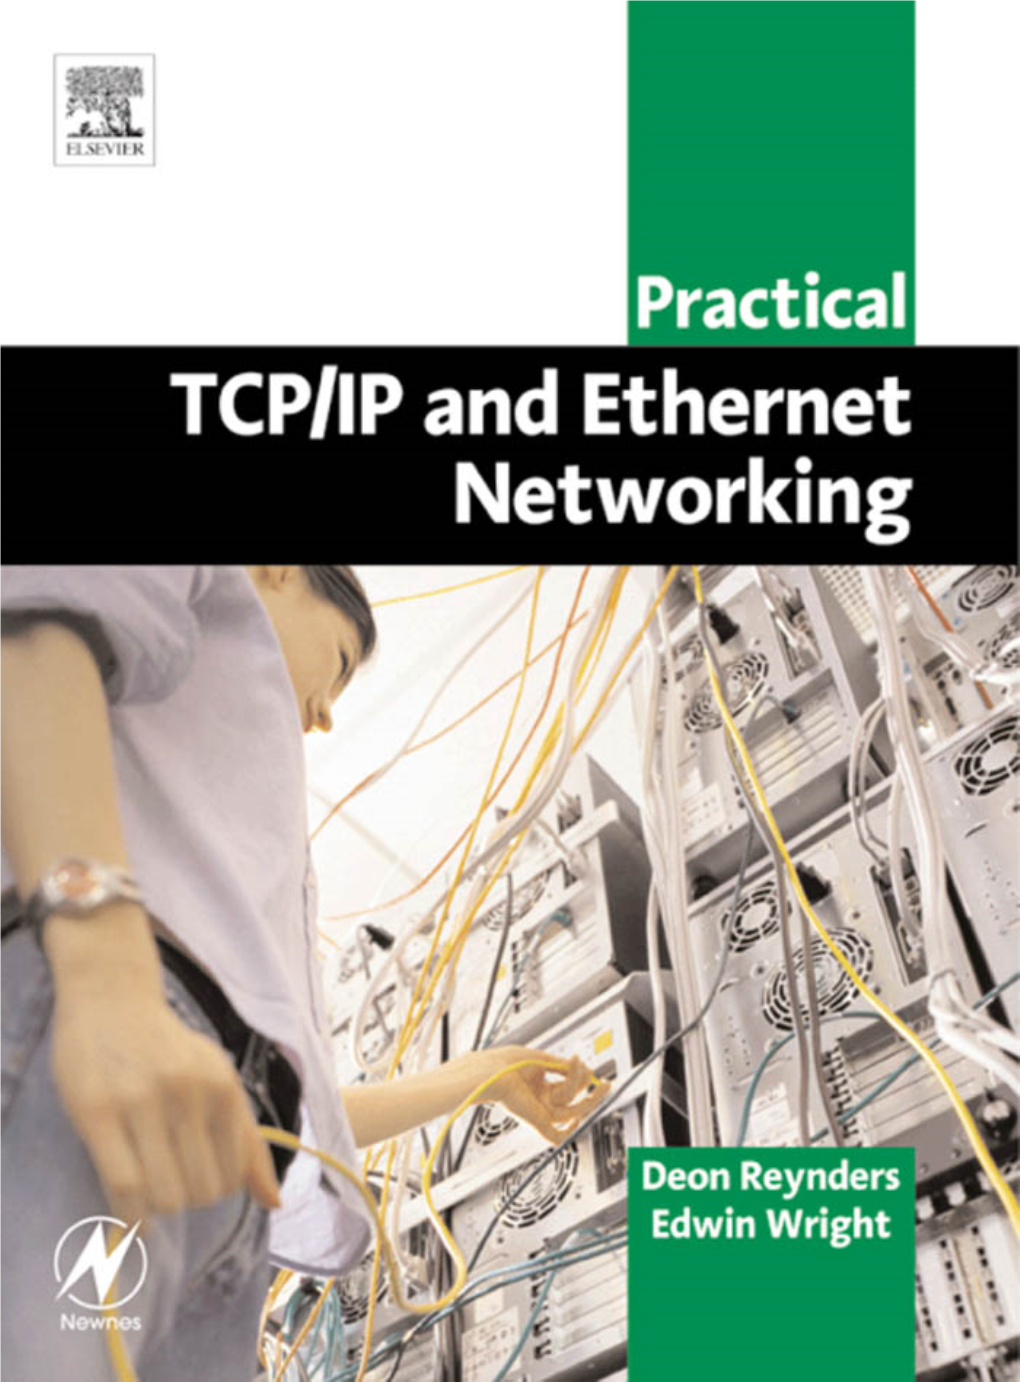 Practical TCP/IP and Ethernet Networking Titles in the Series